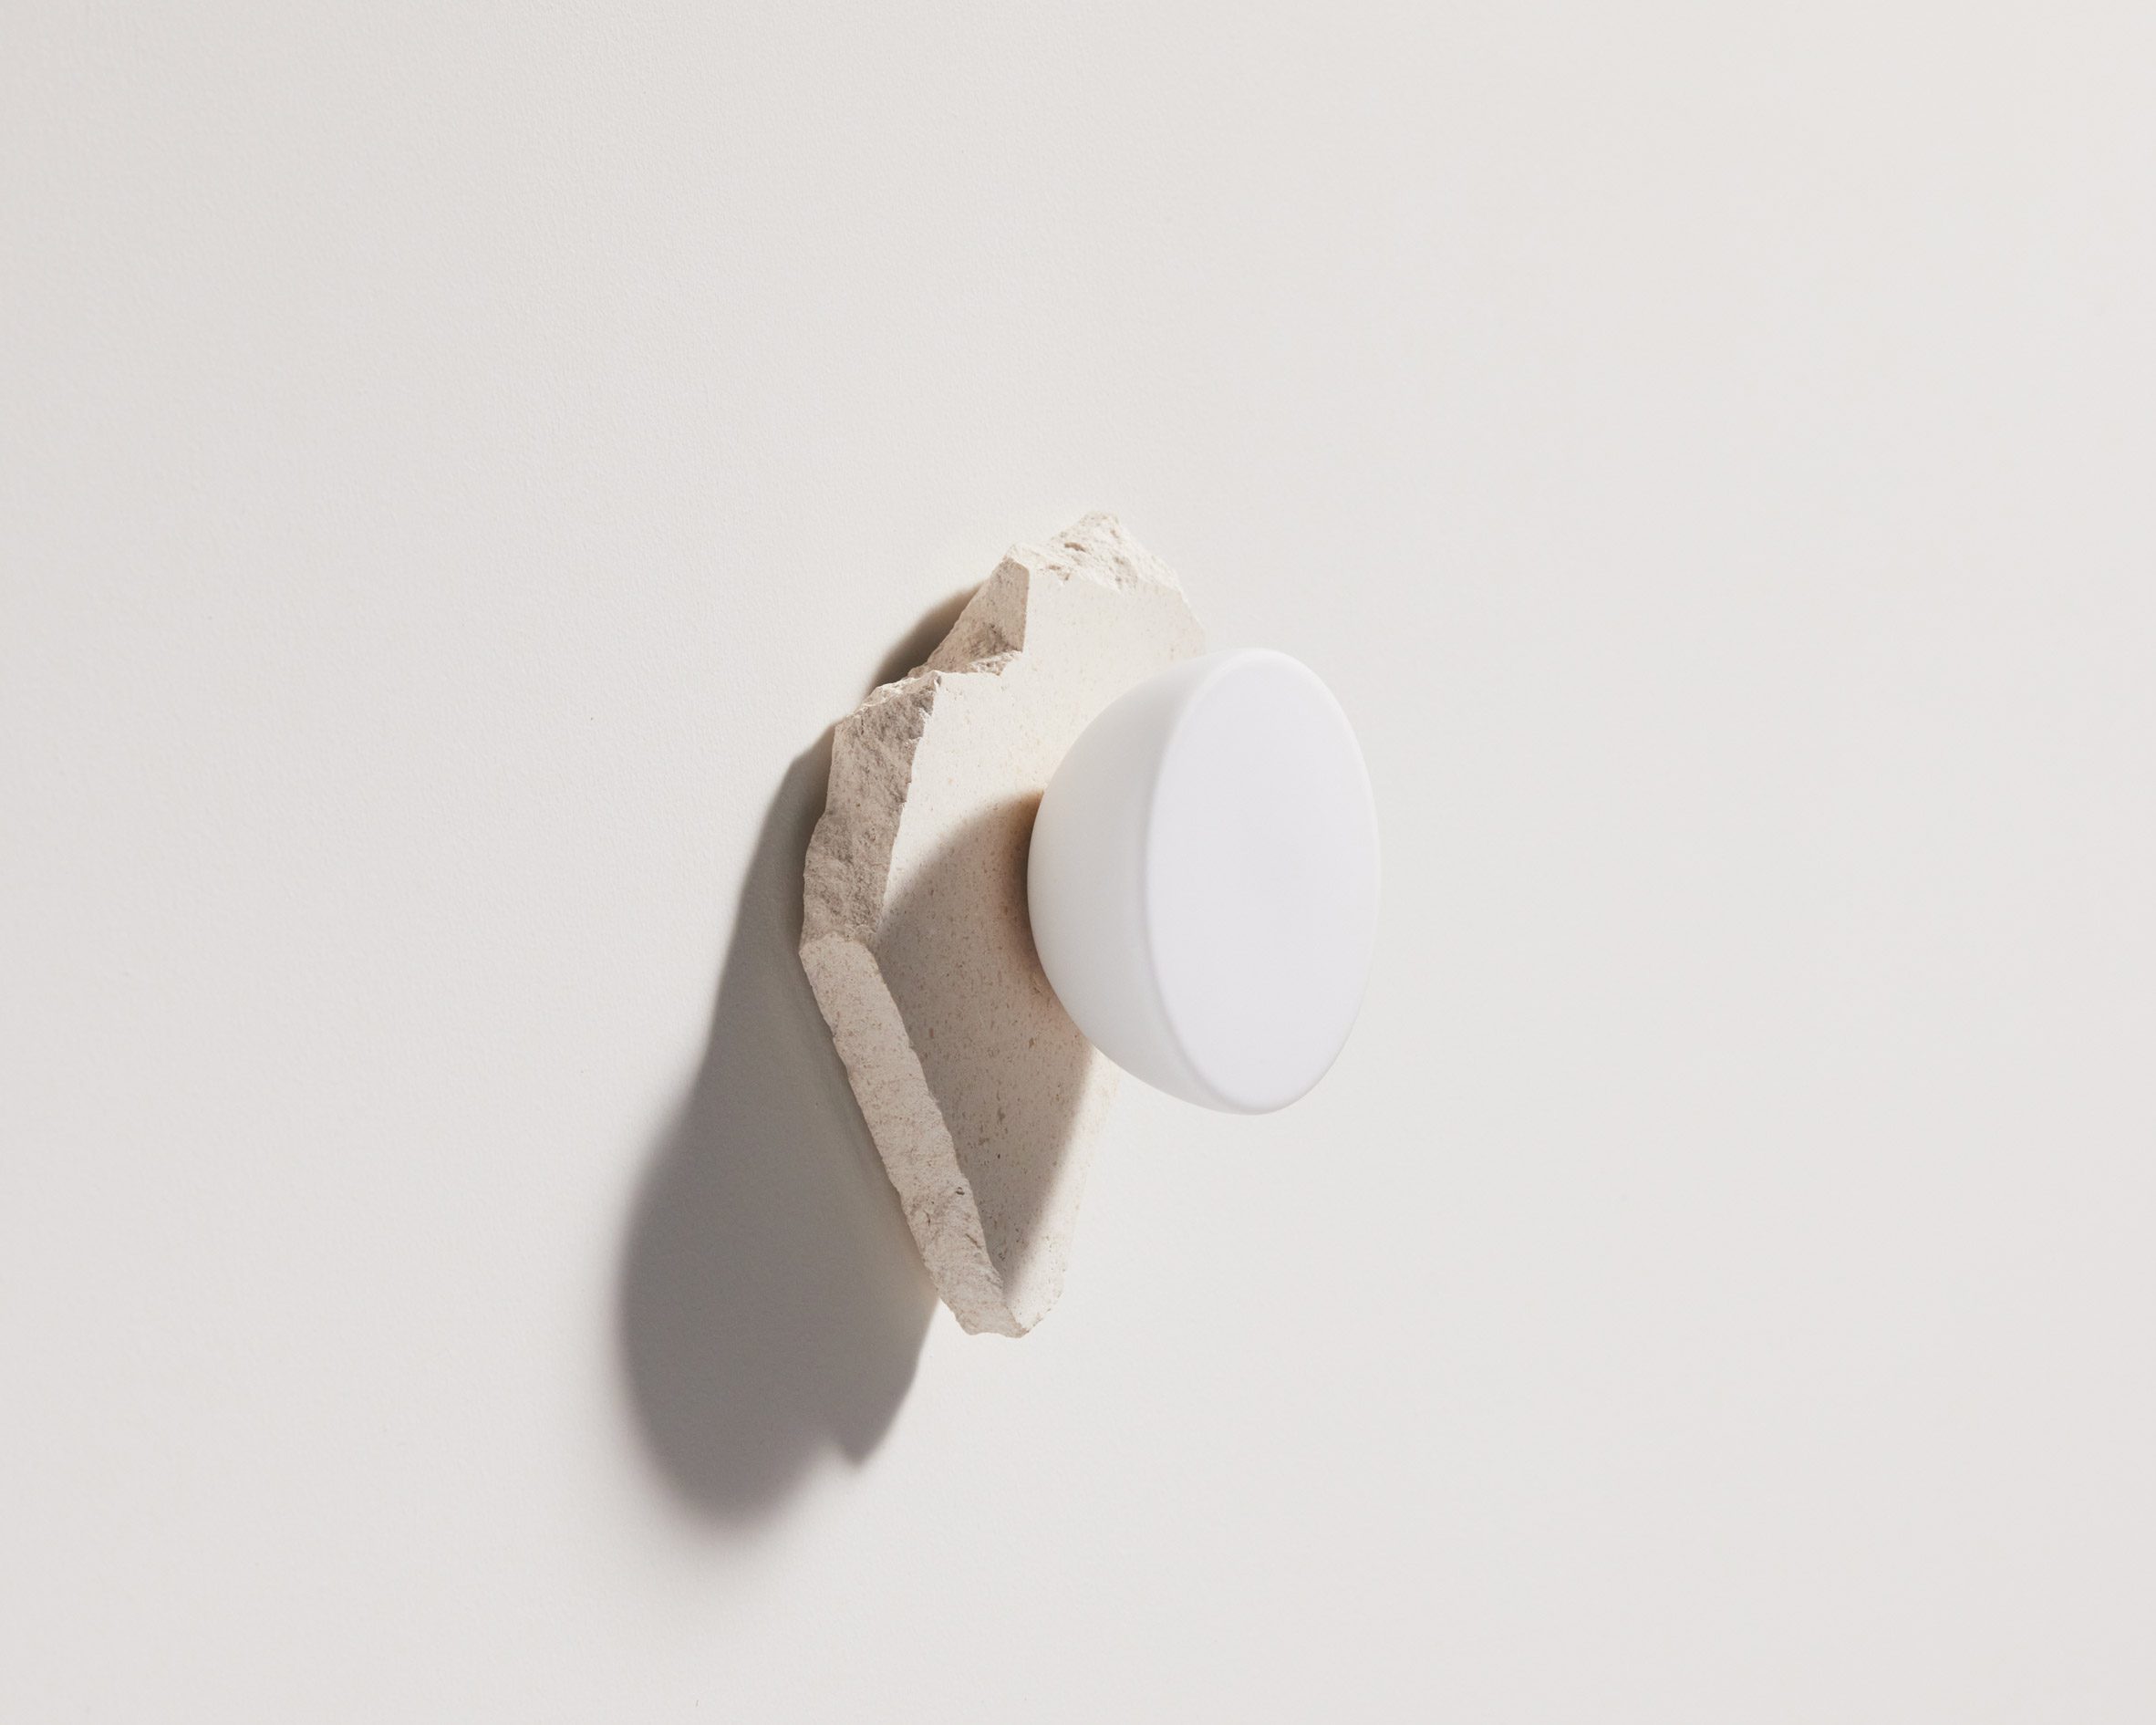 Offcut wall sconce by Nightworks Studio